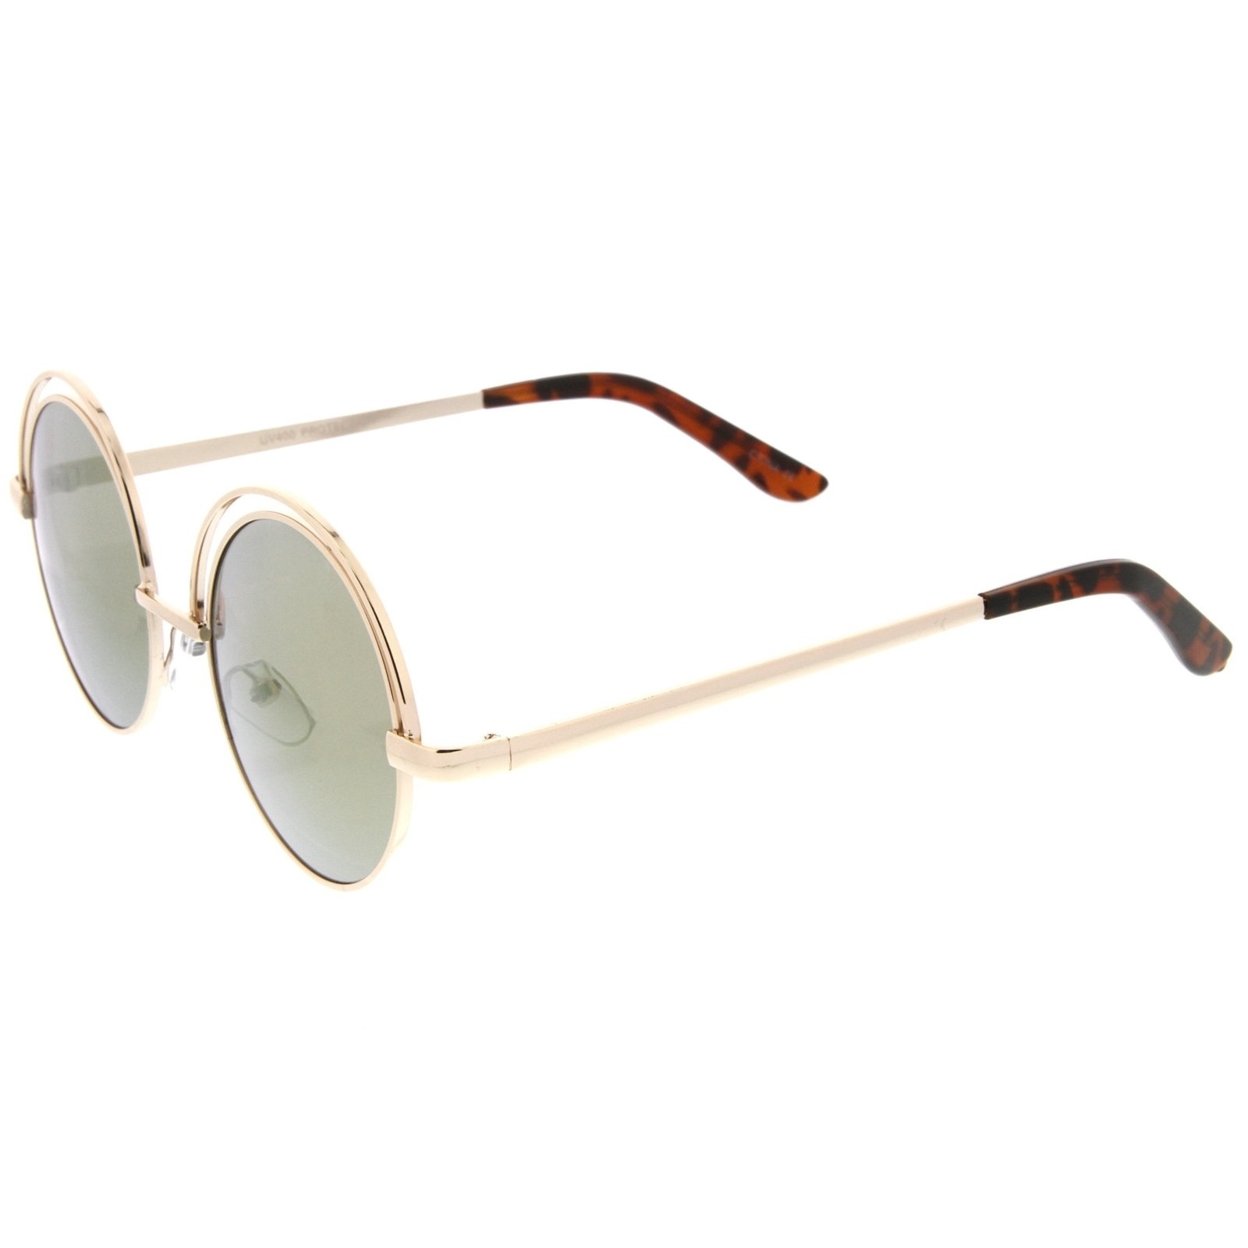 Retro Open Metal Colored Mirror Flat Lens Round Sunglasses 48mm - Gold / Pink-Gold Mirror